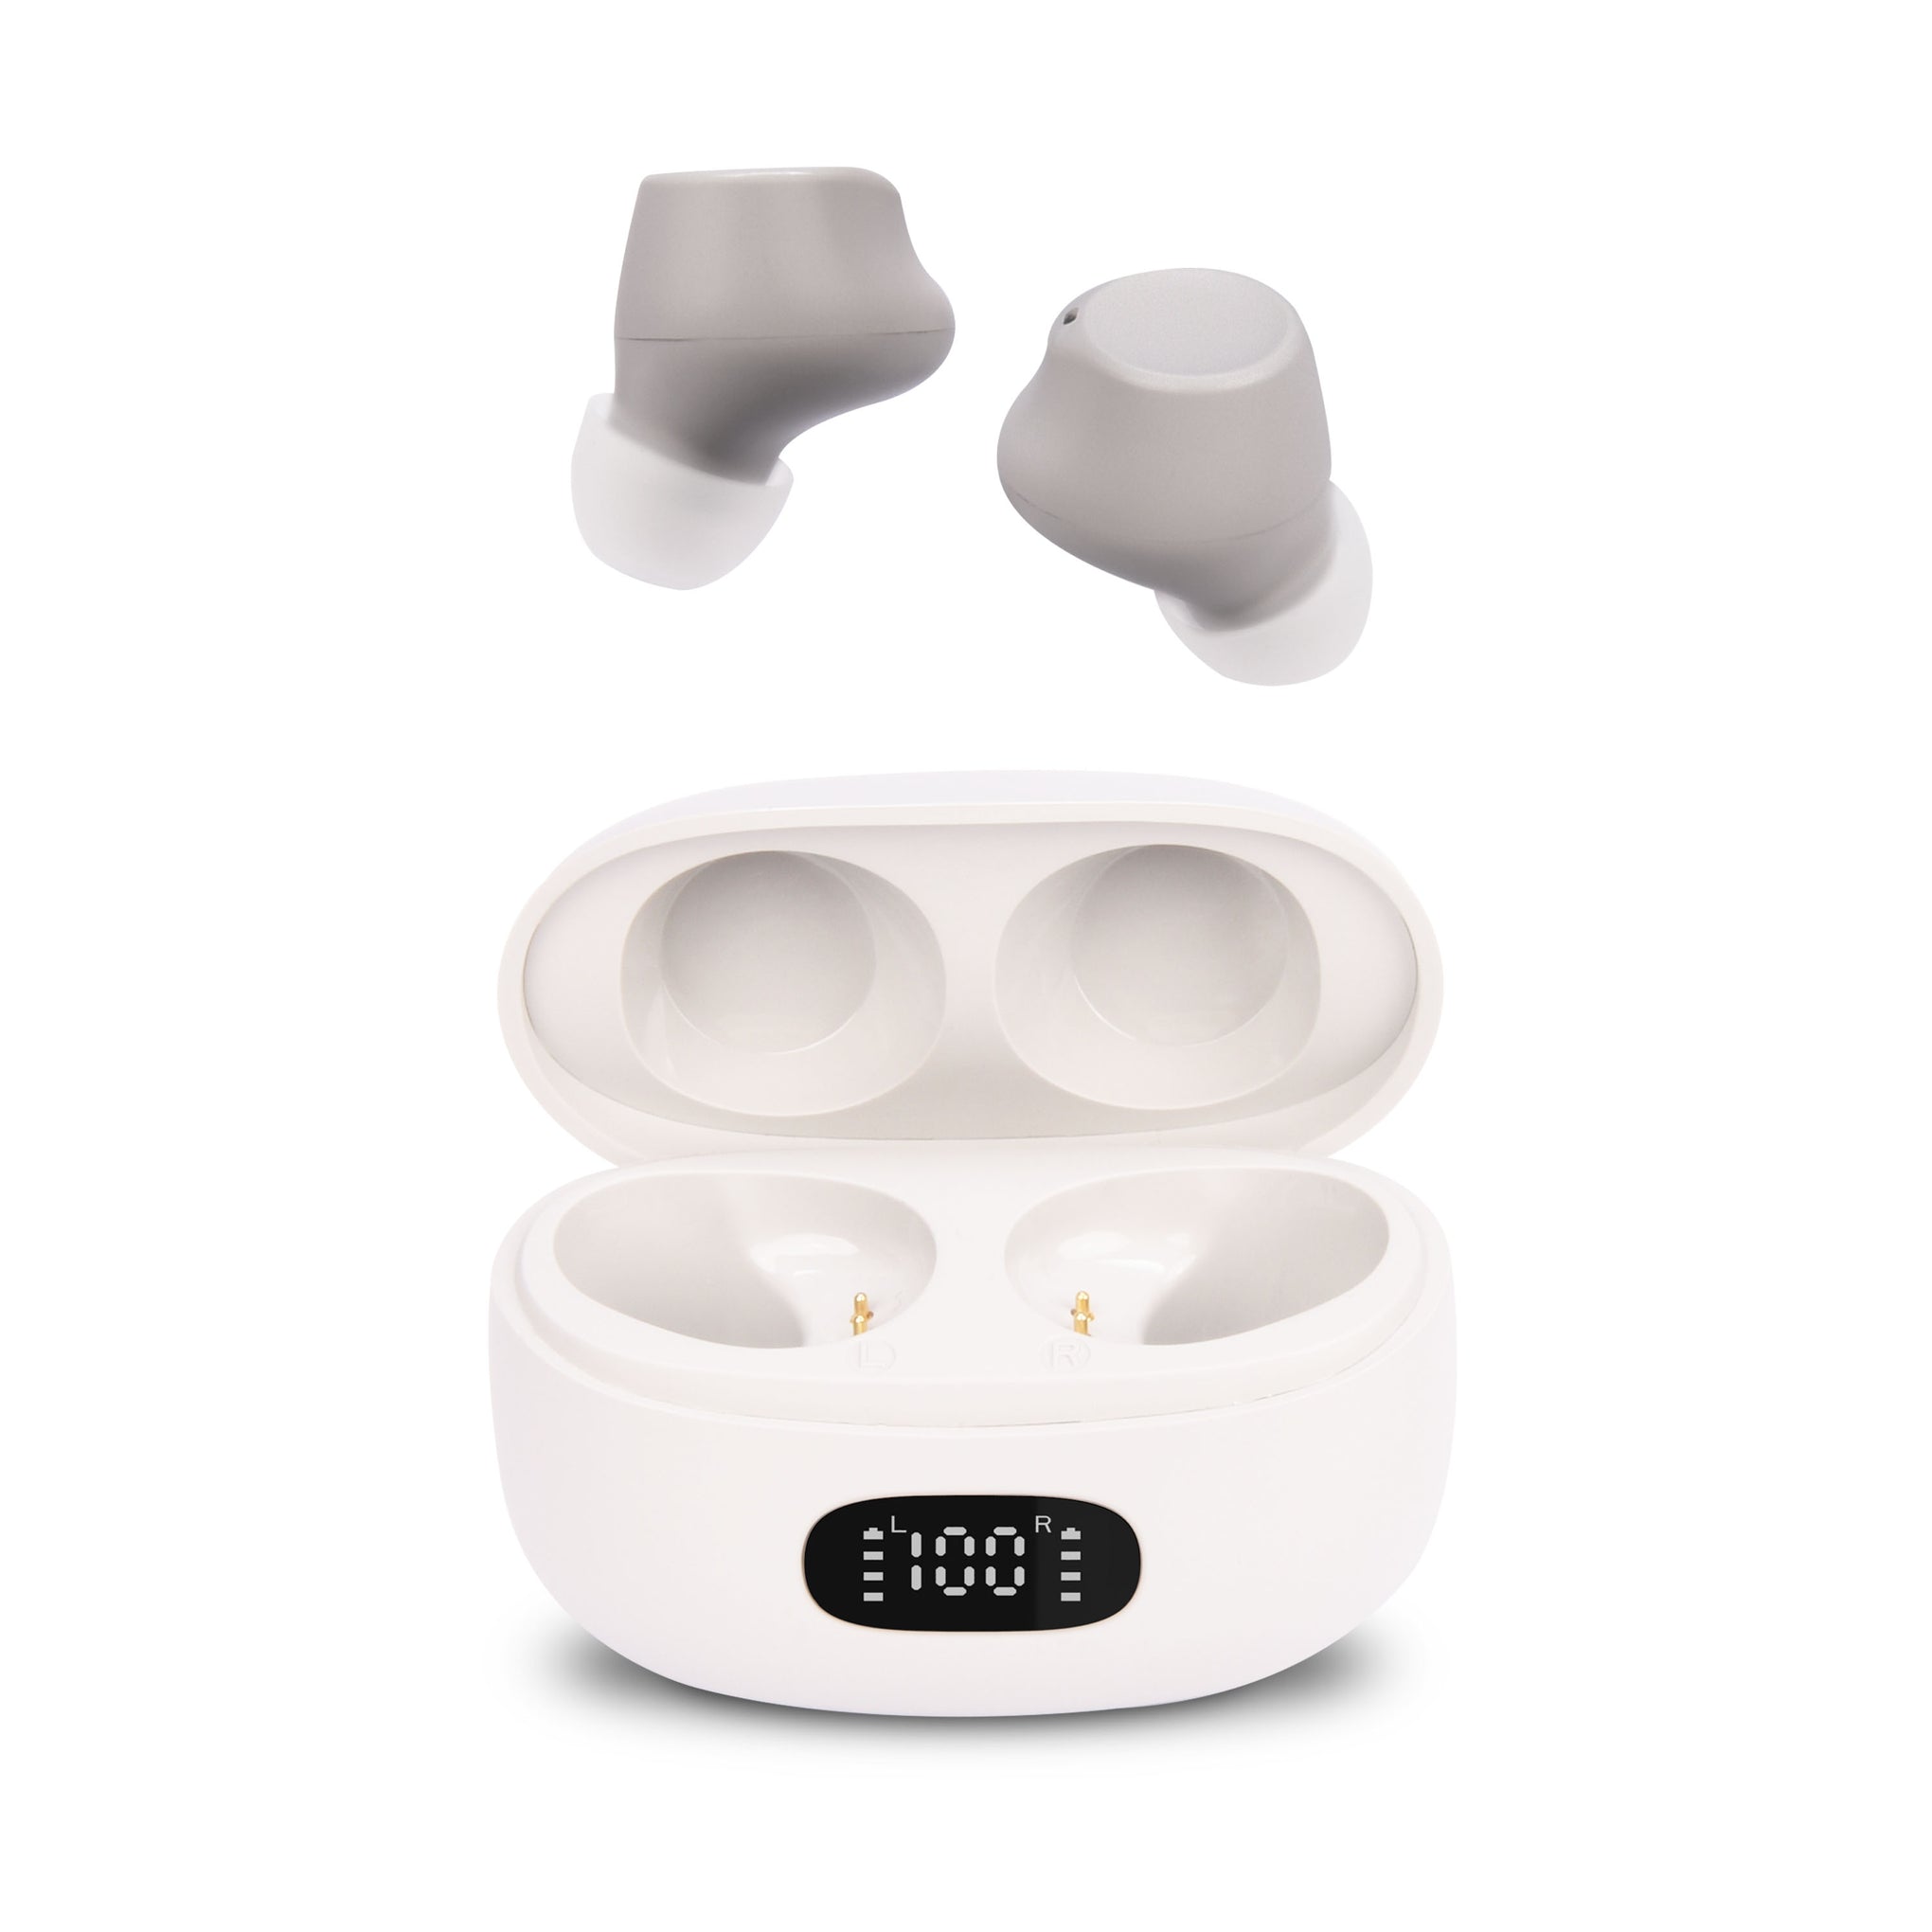 Rechargeable Digital Hearing Aids